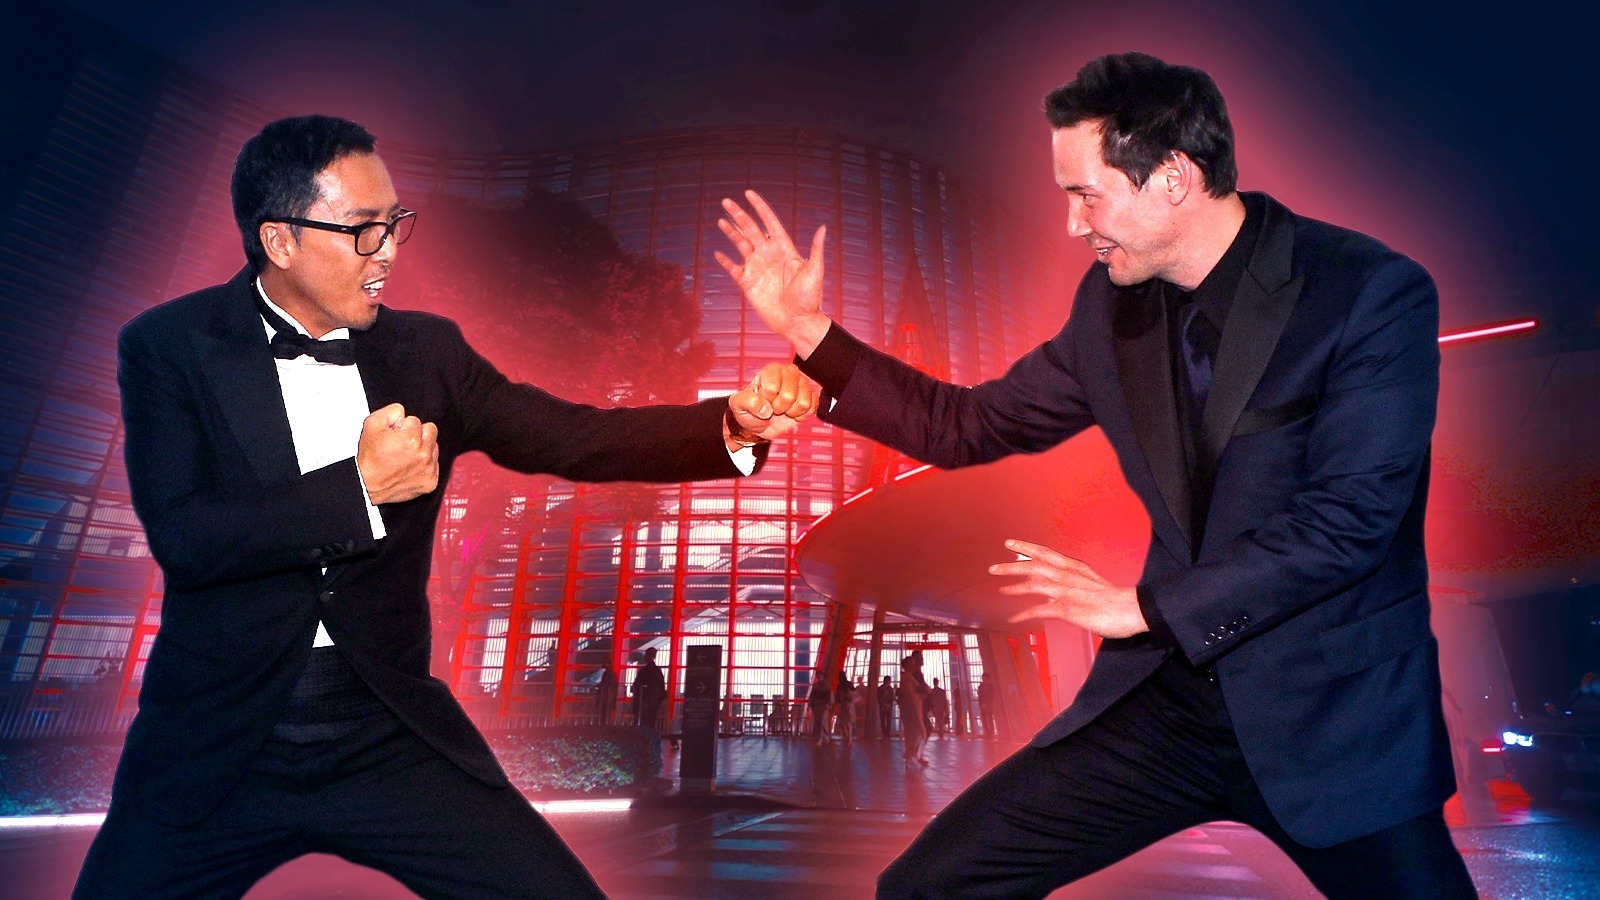 IGN - John Wick 4 has cast Donnie Yen alongside Keanu Reeves. Yen will play  an old friend and fellow assassin to John Wick in the fourth installment of  the series.